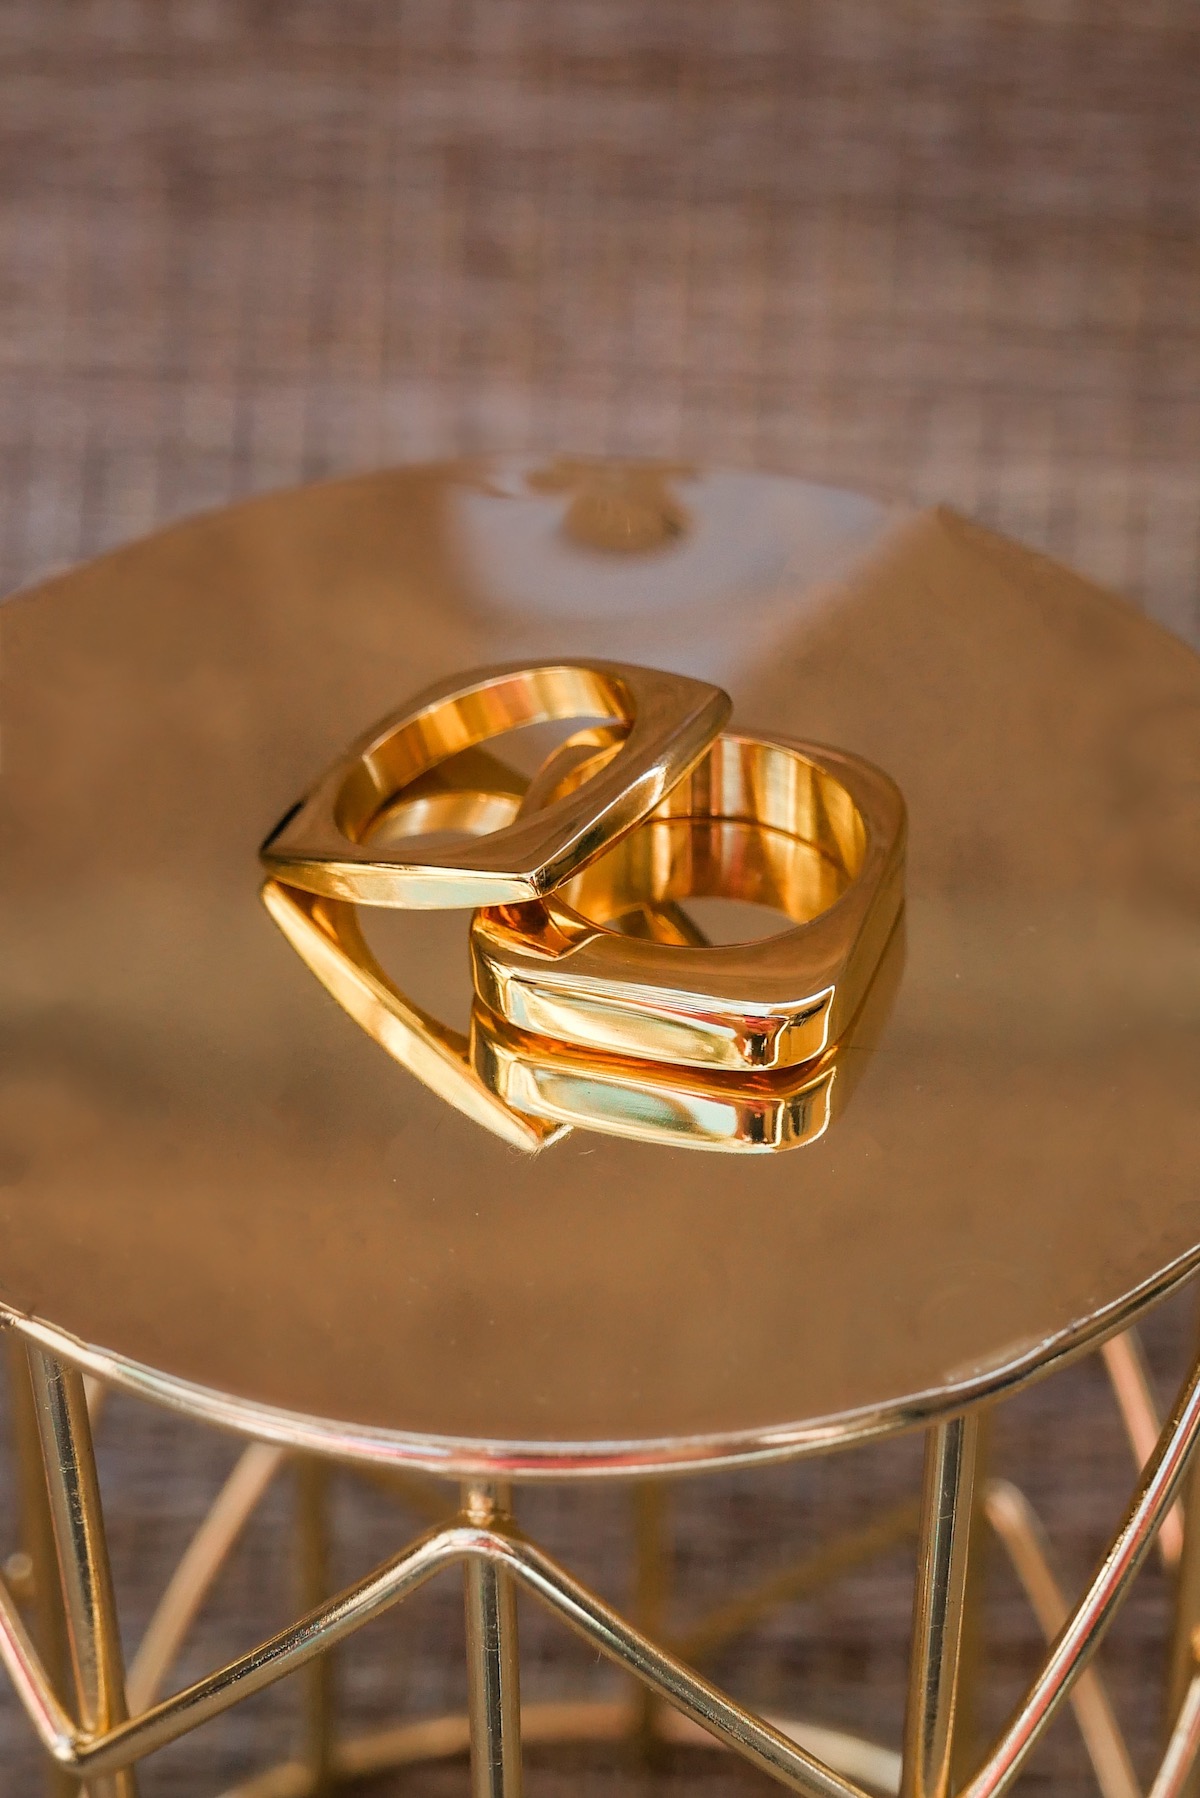 AMOR DEUS 14k Gold Out of the box rings